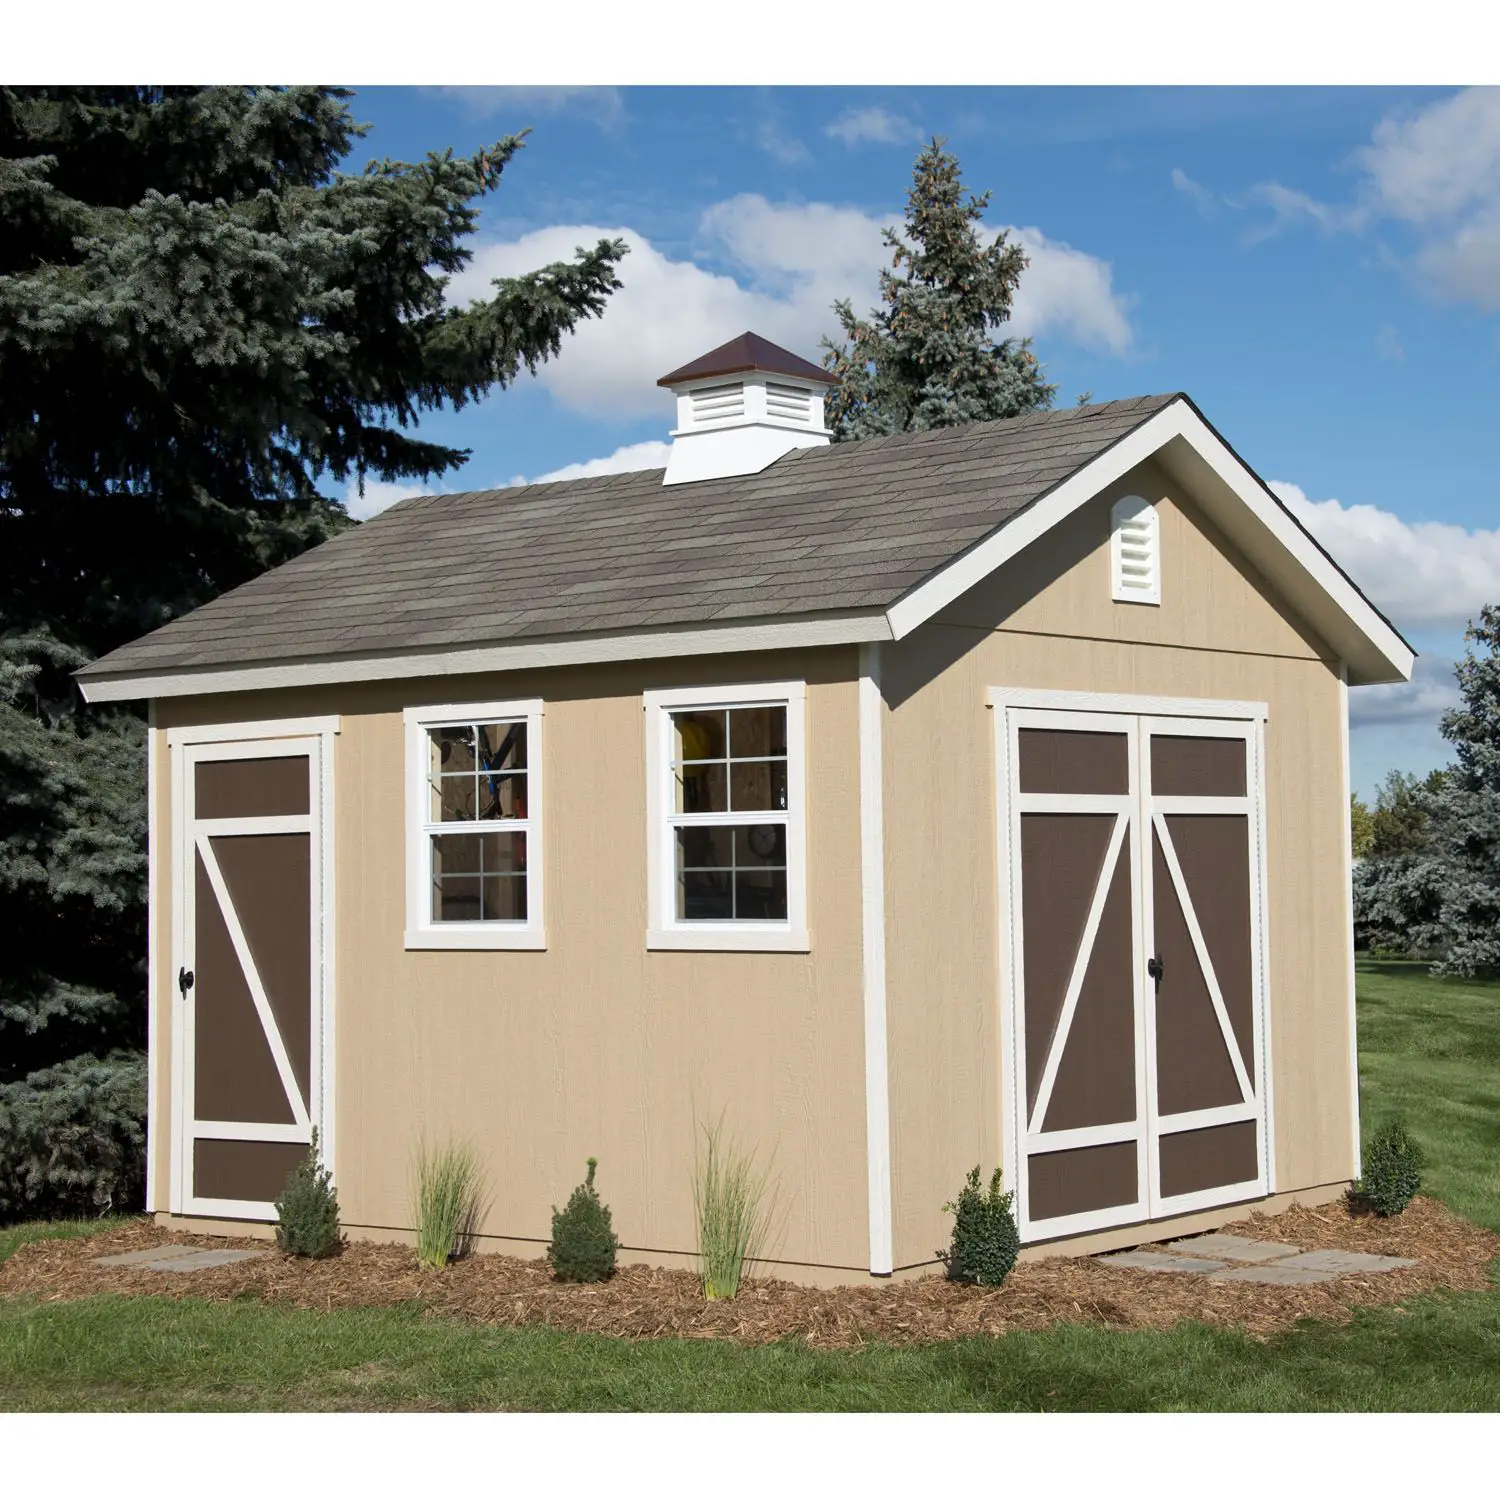 How Much For A 10x12 Shed